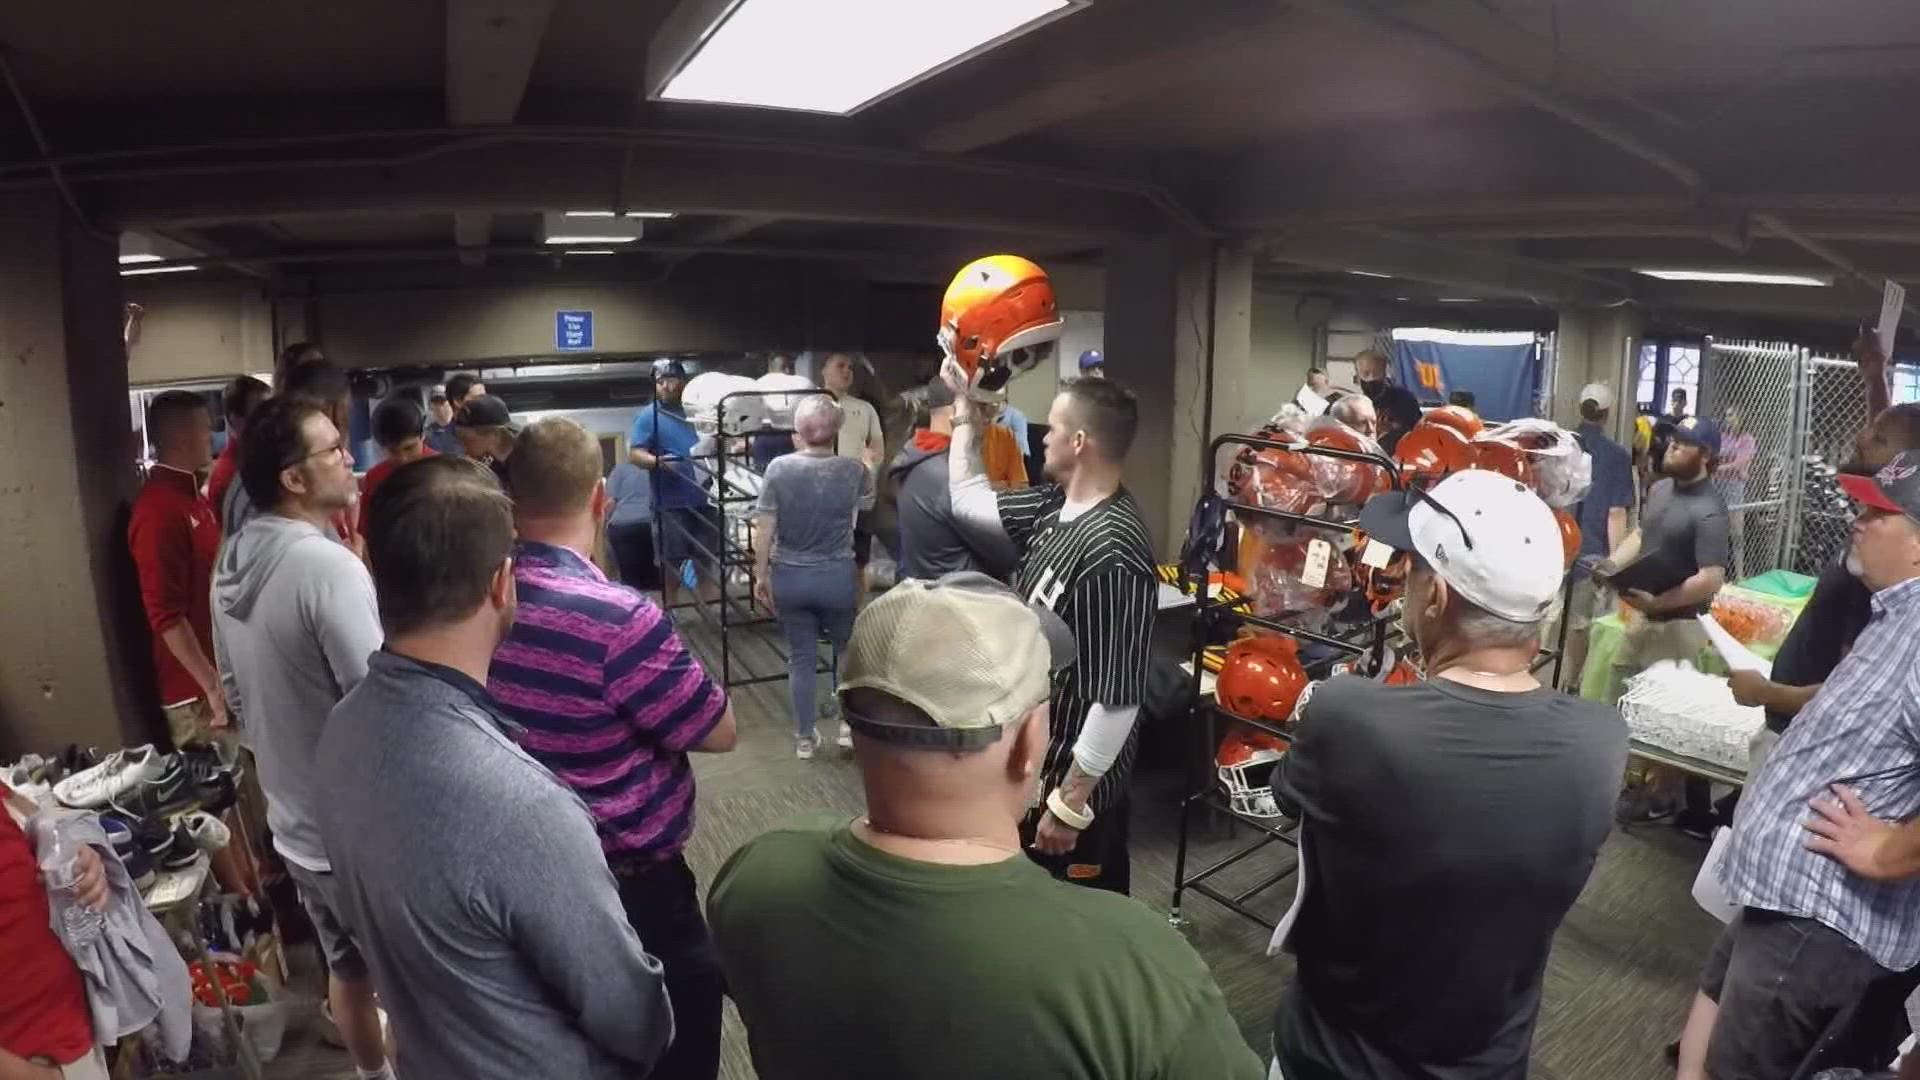 Instant Auction and Estate Sales auctioned off hundreds of leftover Spokane Shock items, including jerseys, merchandise, office furniture and trophies.